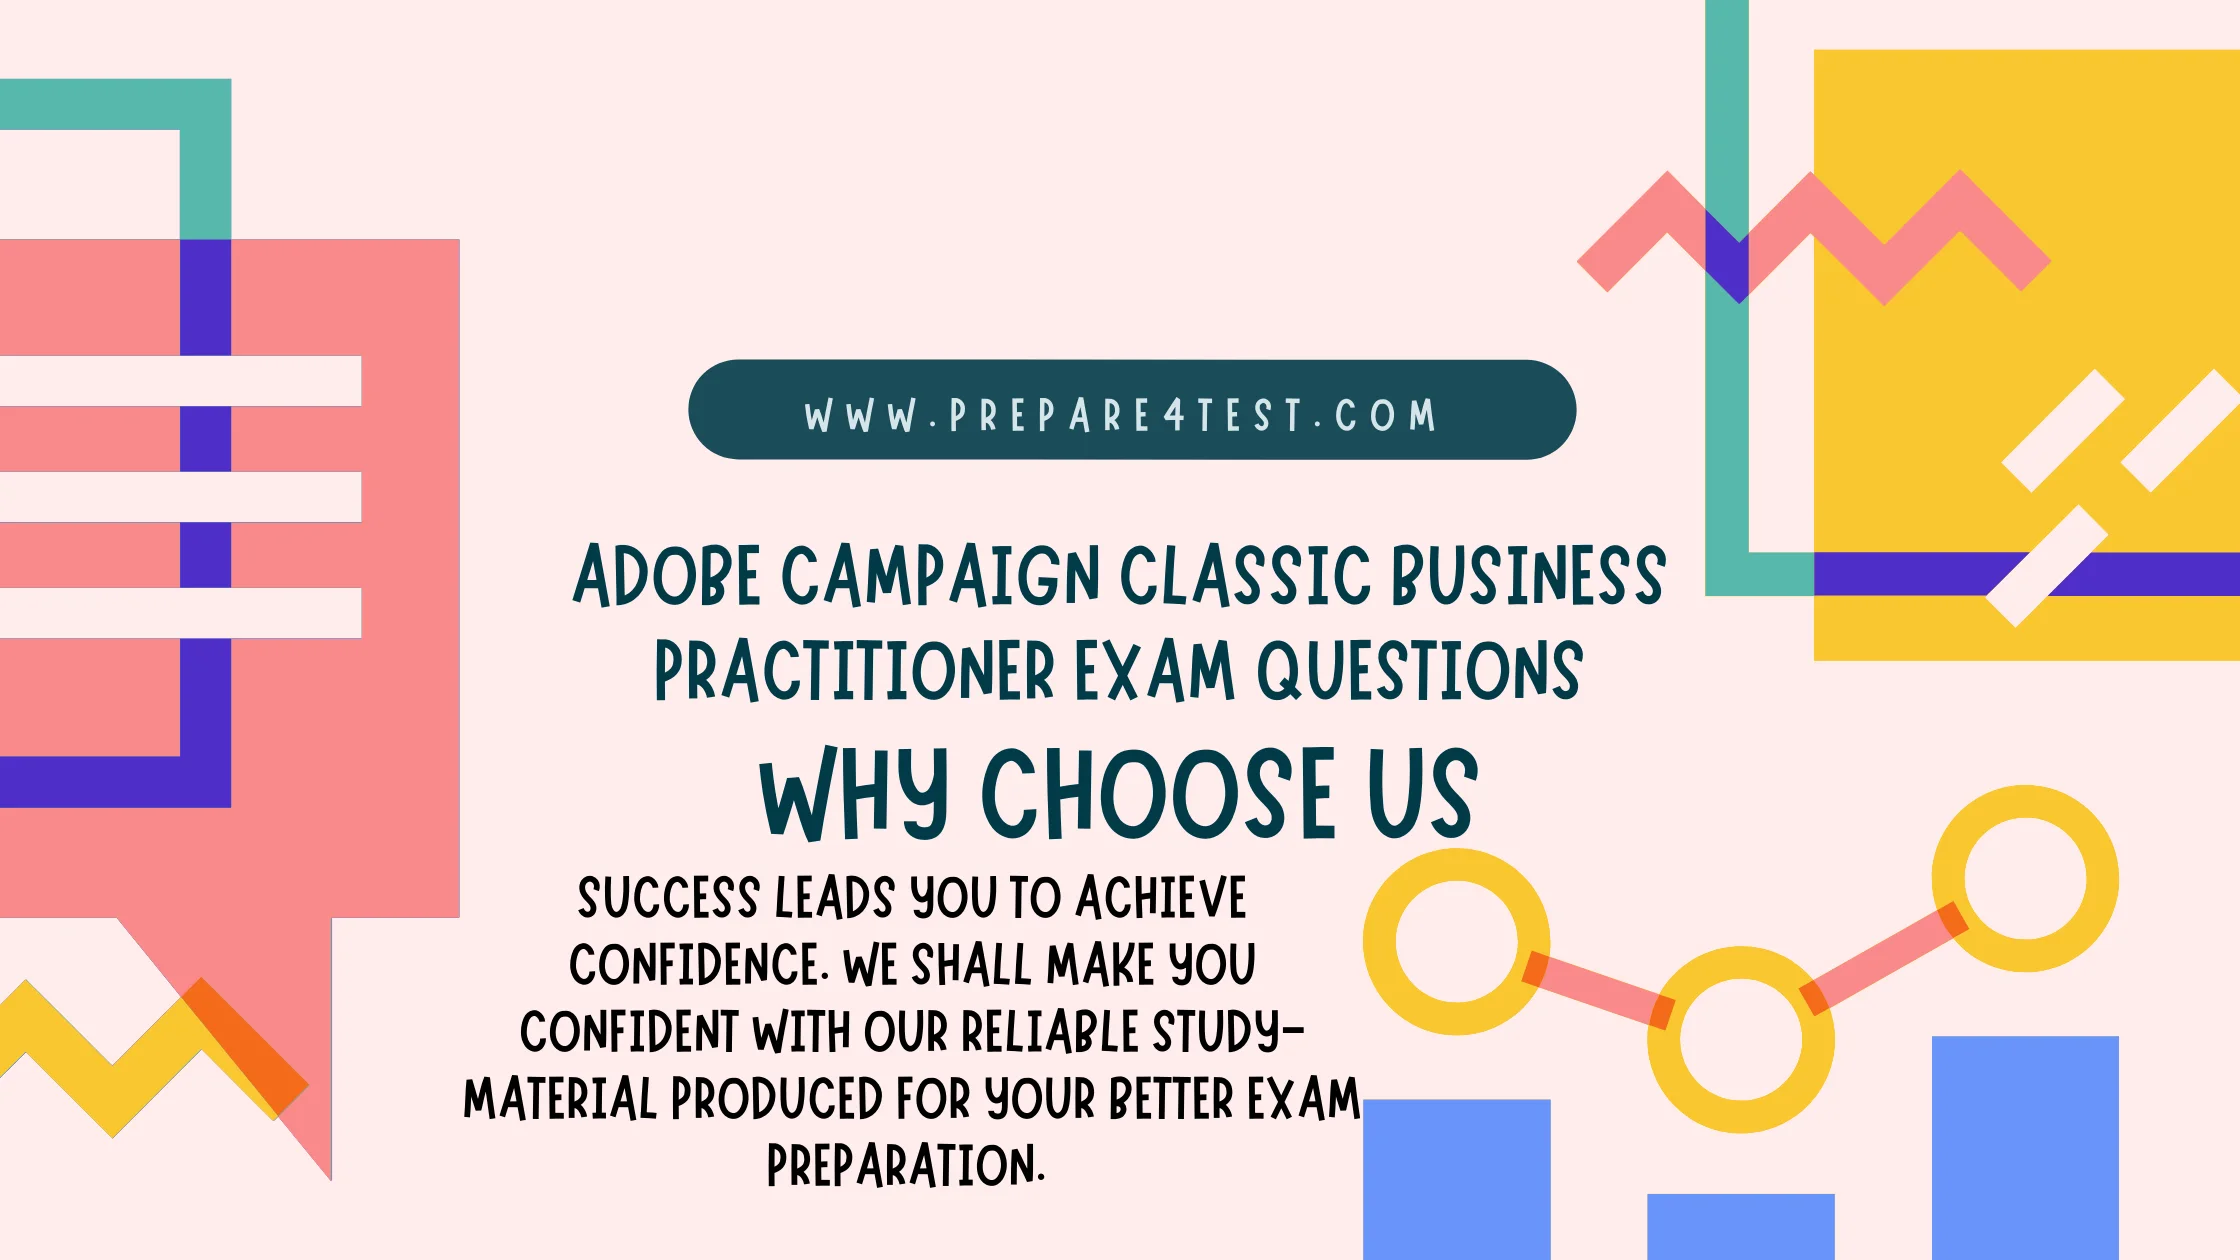 Adobe Campaign Classic Business Practitioner Exam Questions promo codes apply